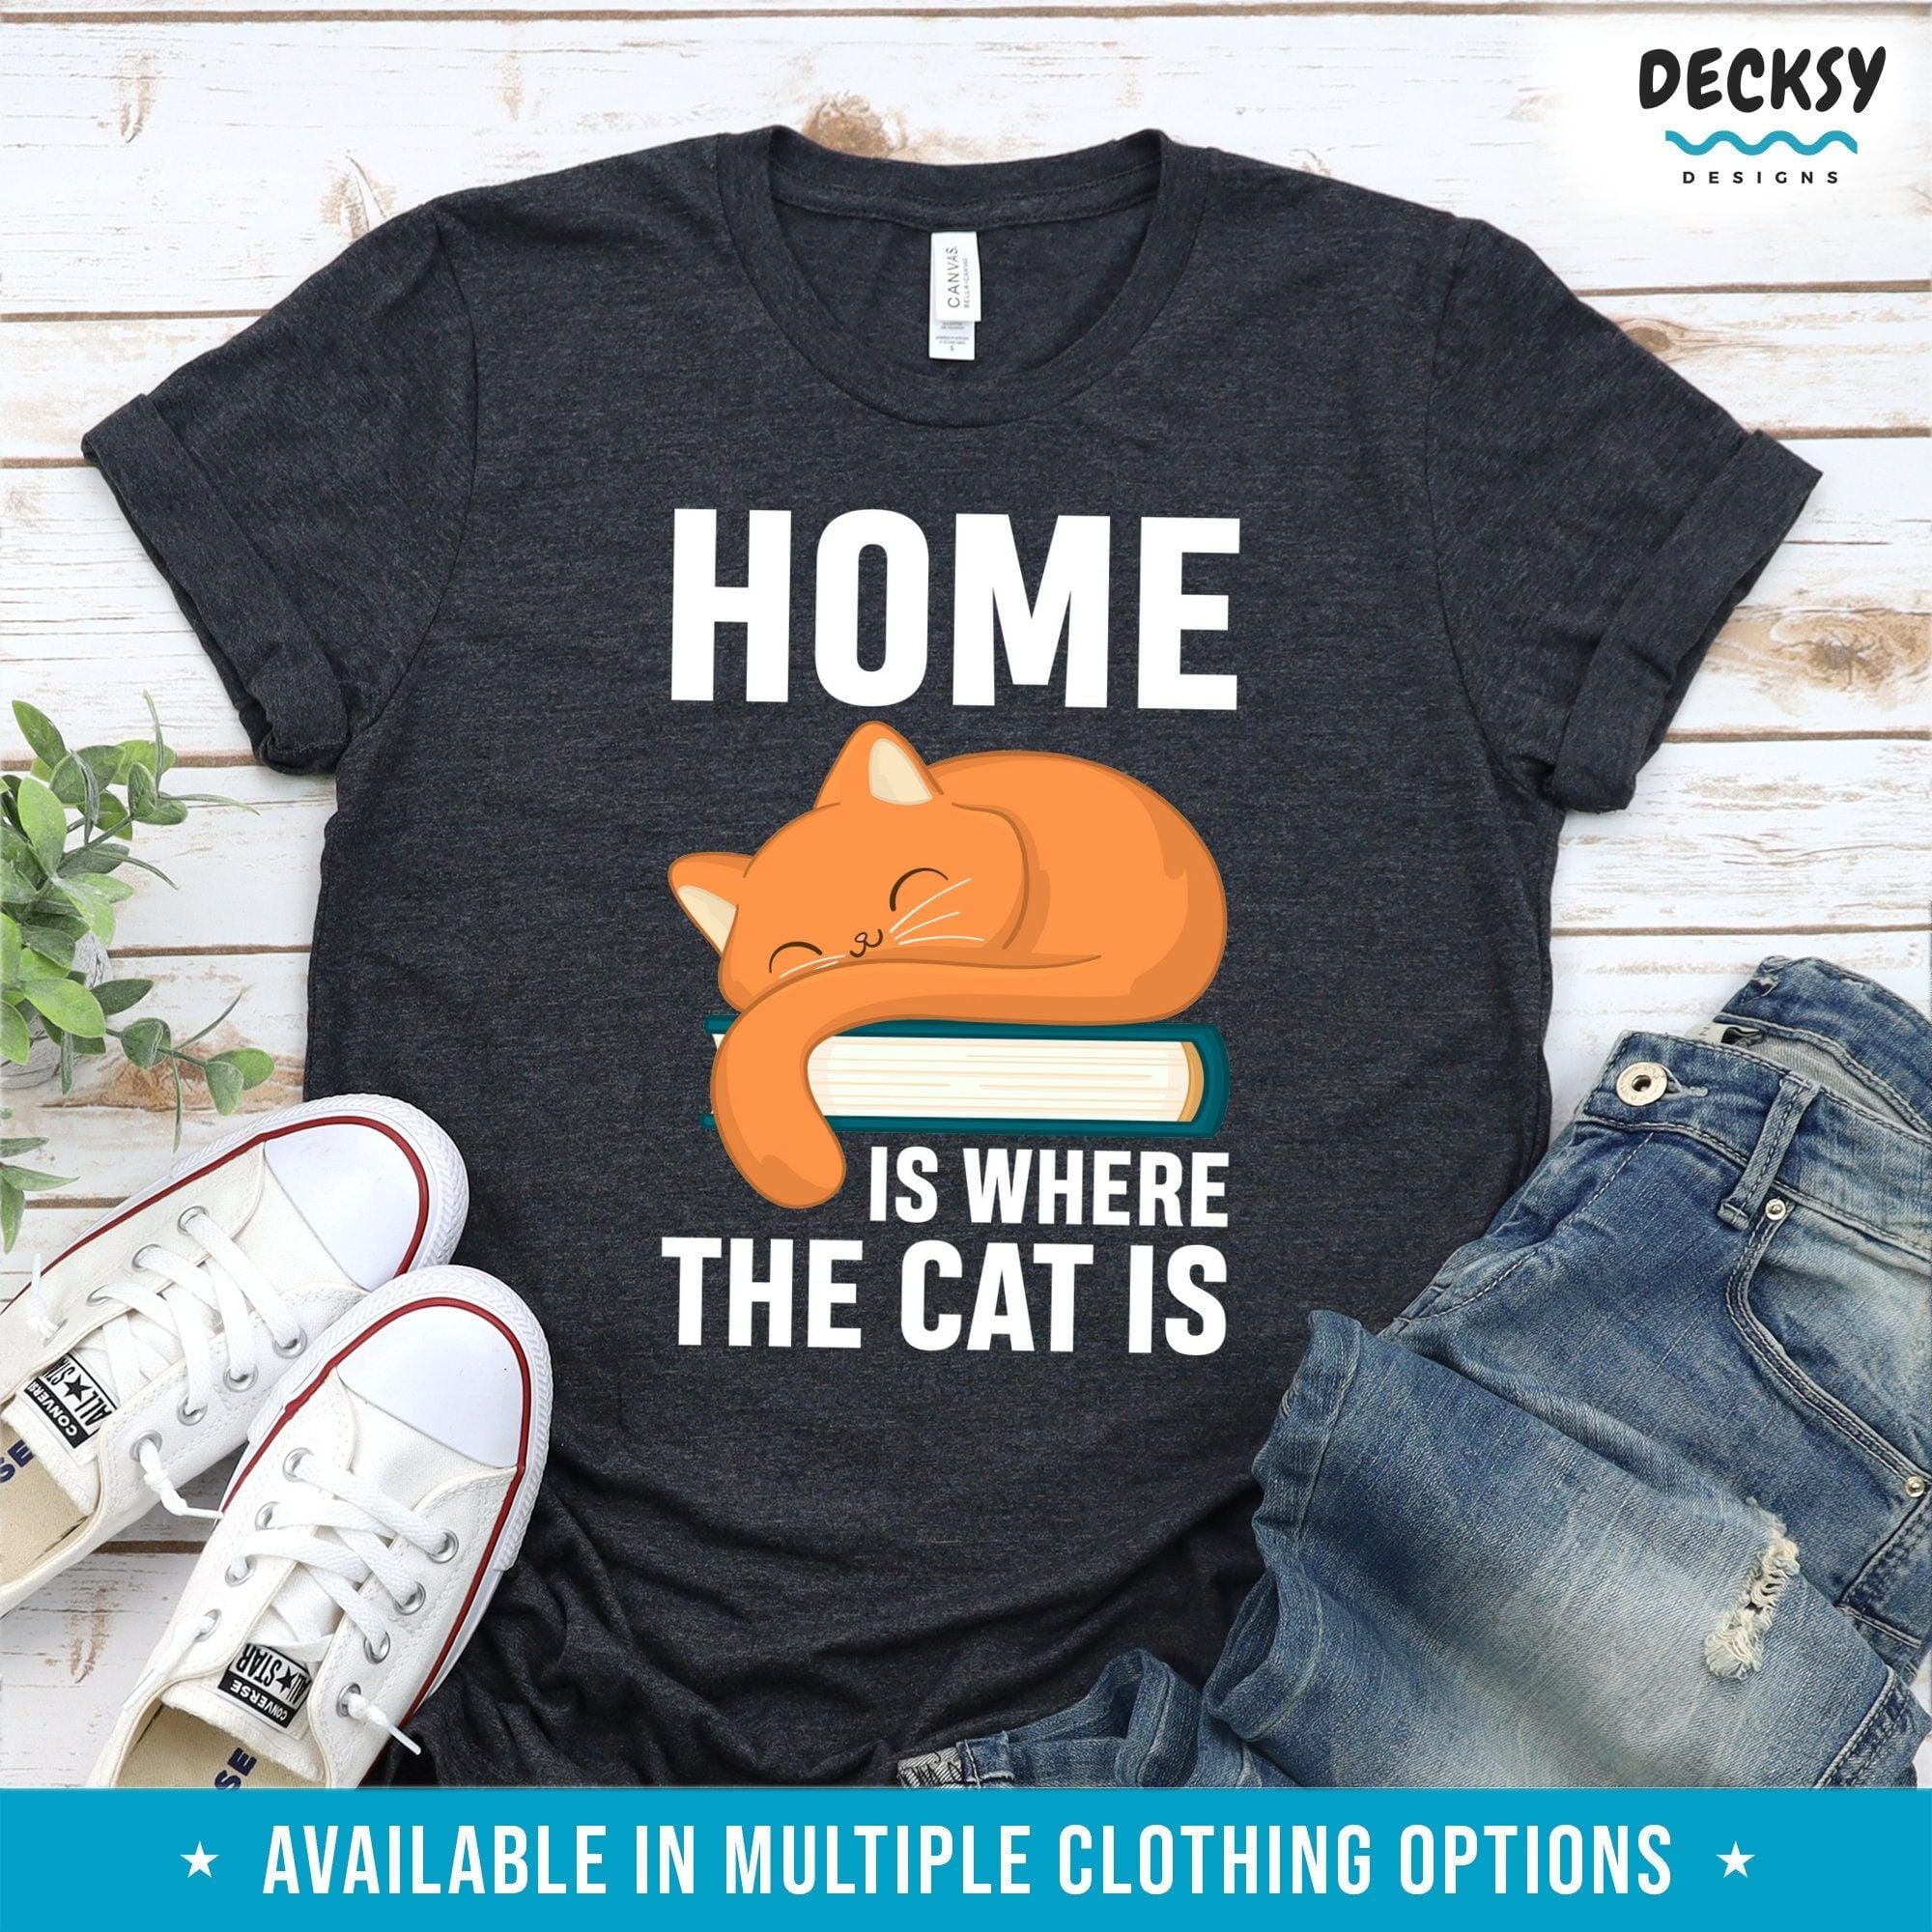 Cat Lover T-Shirt, Gift For Cat Owner-Clothing:Gender-Neutral Adult Clothing:Tops & Tees:T-shirts:Graphic Tees-DecksyDesigns